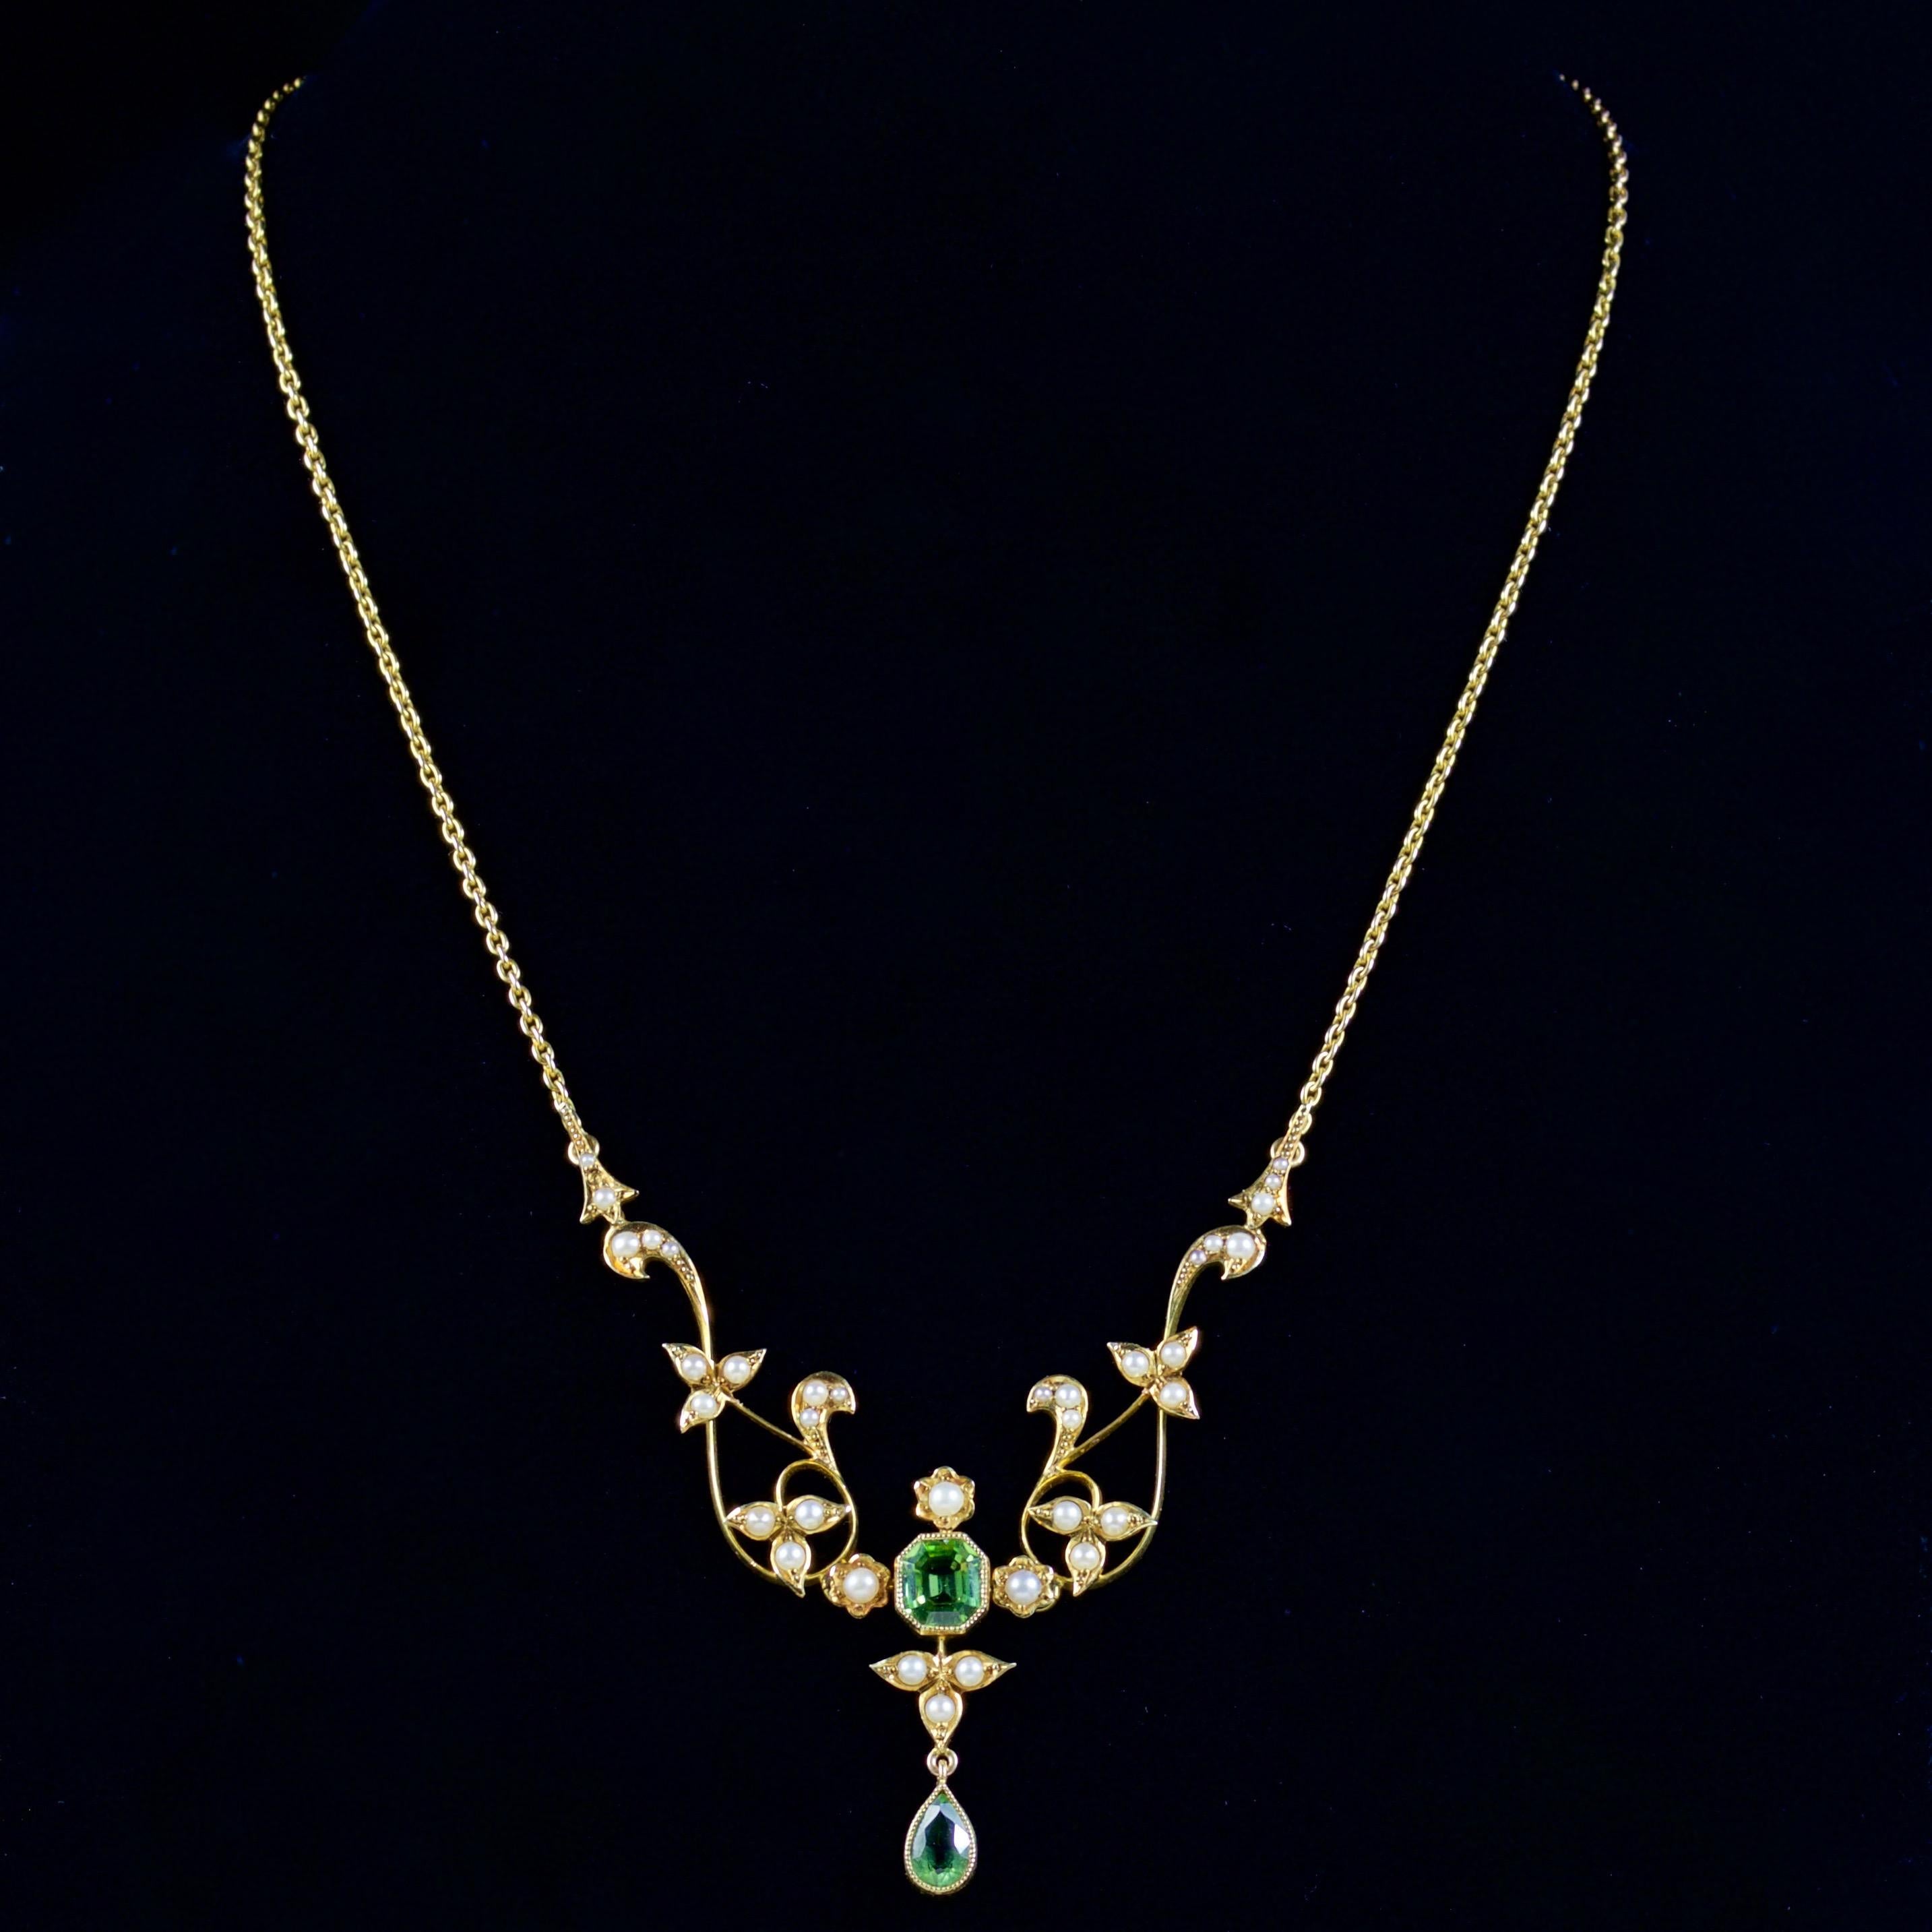 This elegant antique Victorian Peridot and Pearl necklace is Circa 1900.

The superb necklace boasts a beautiful combination of Pearls and Peridots in a floral 15ct Gold gallery.

The largest Peridot is 1ct which leads to the dropper which is